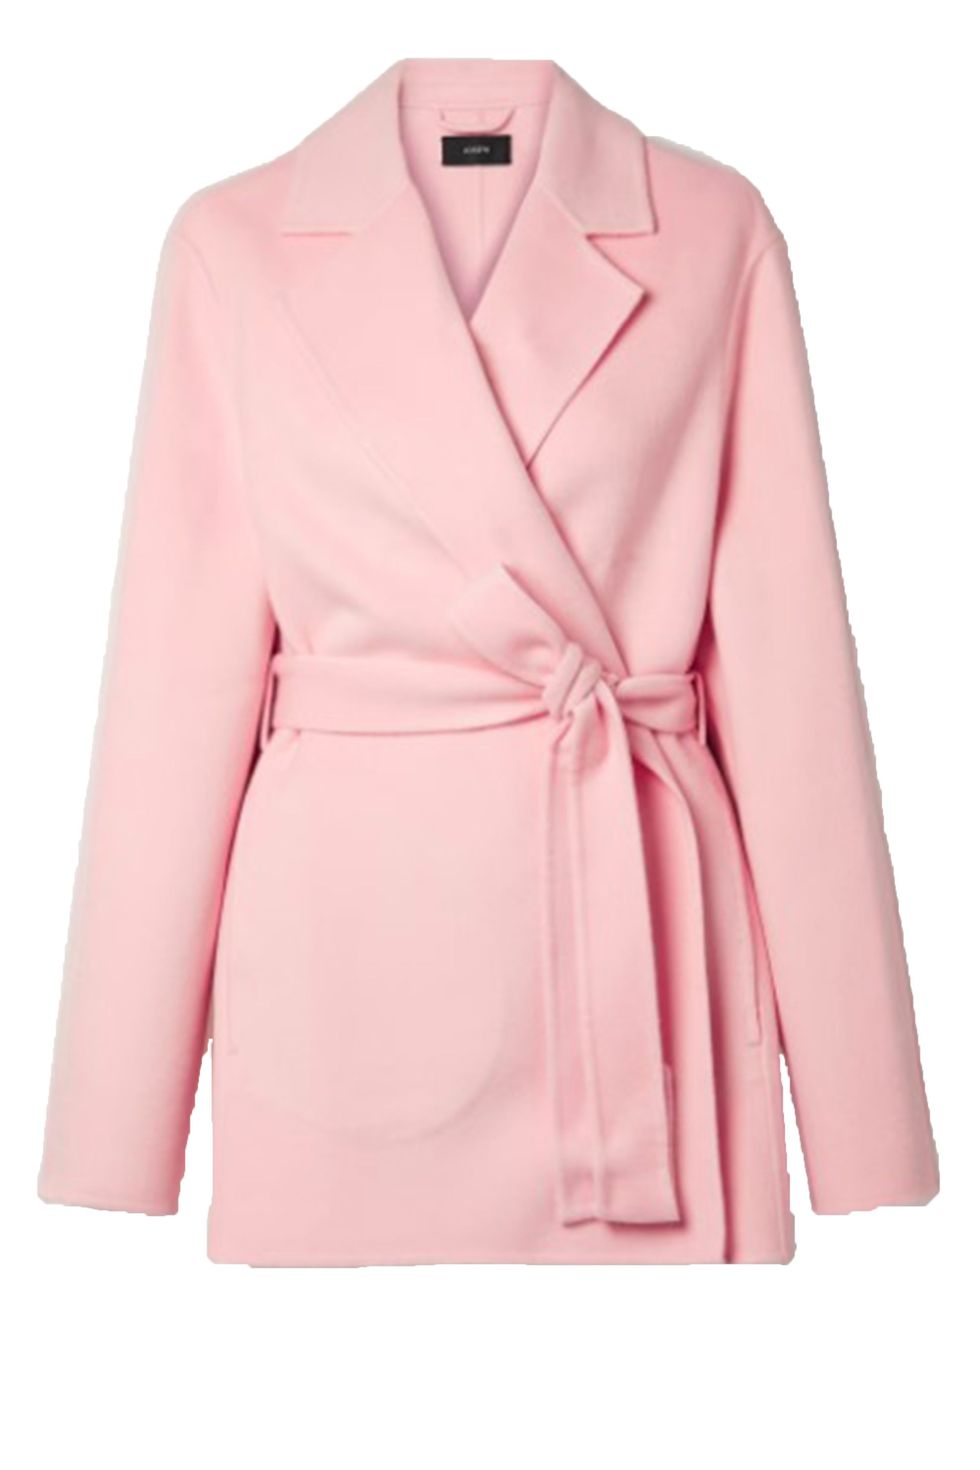 10 of the best dressing-gown coats to shop